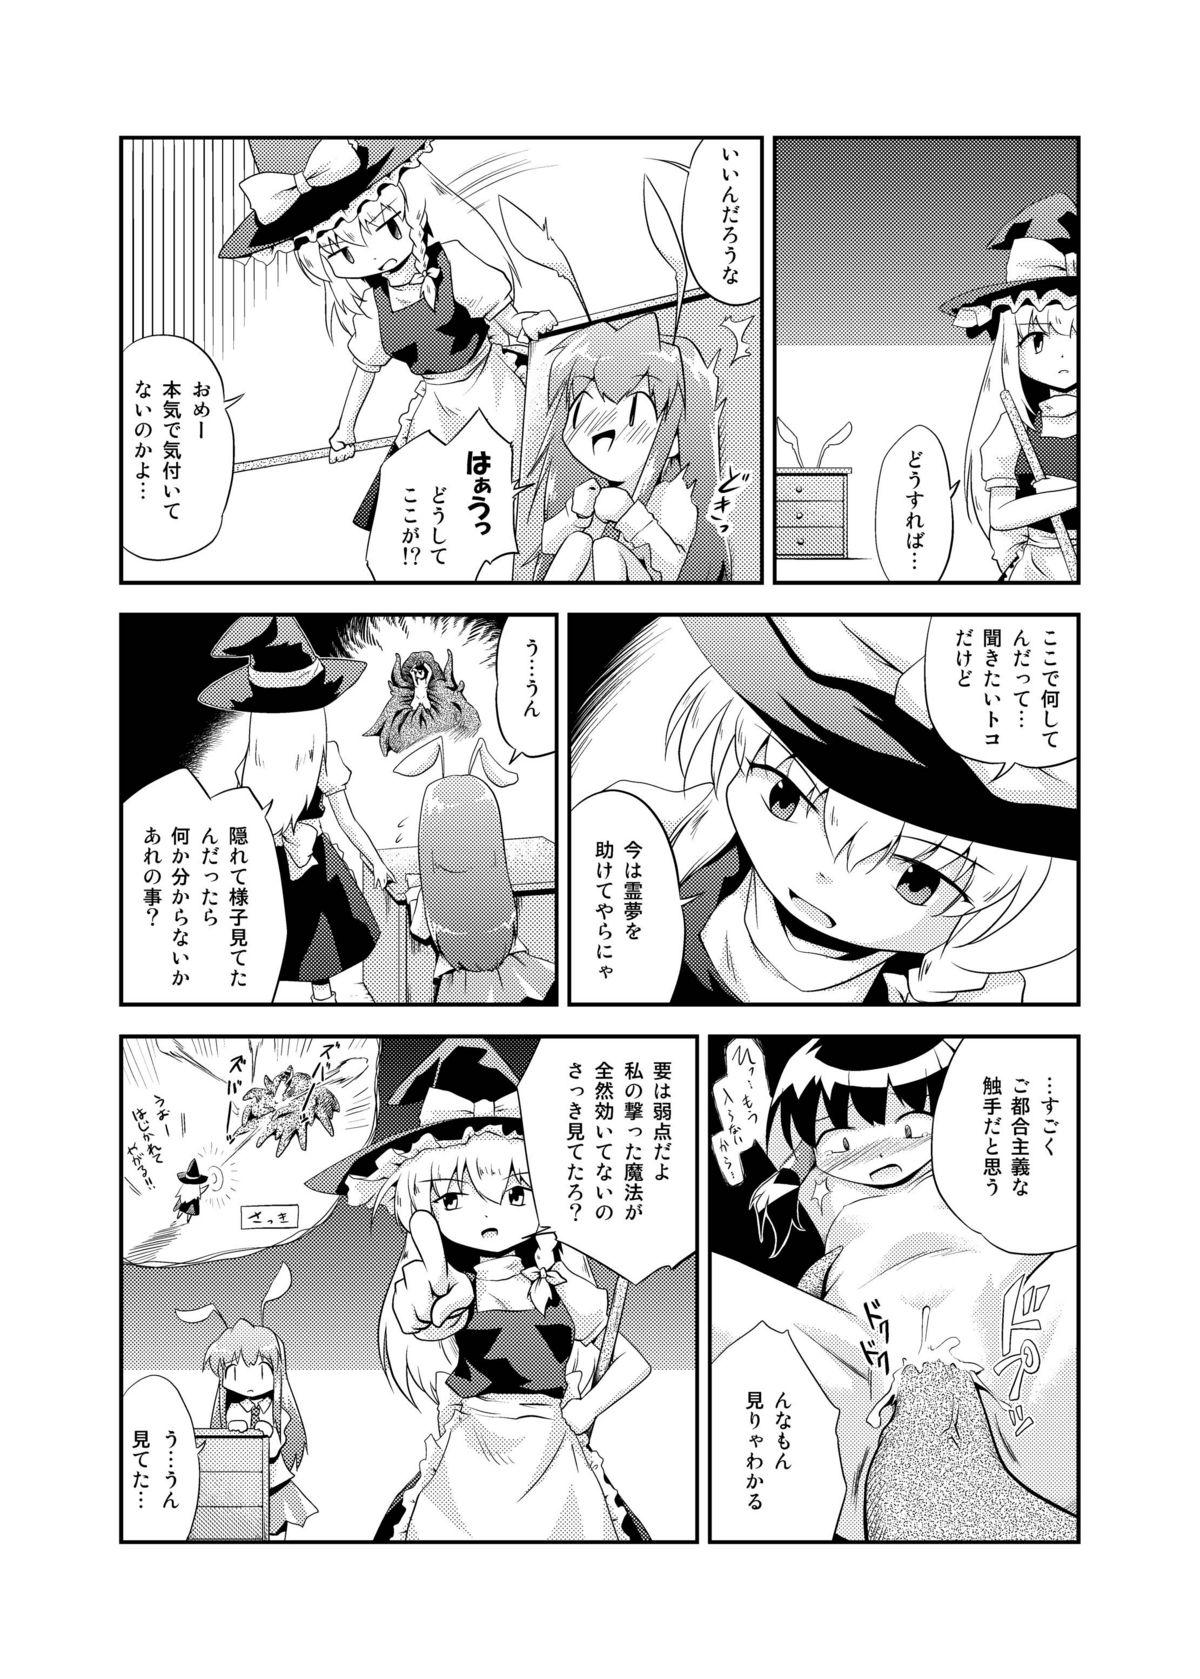 One DISARM CLOTHES - Touhou project Uniform - Page 4